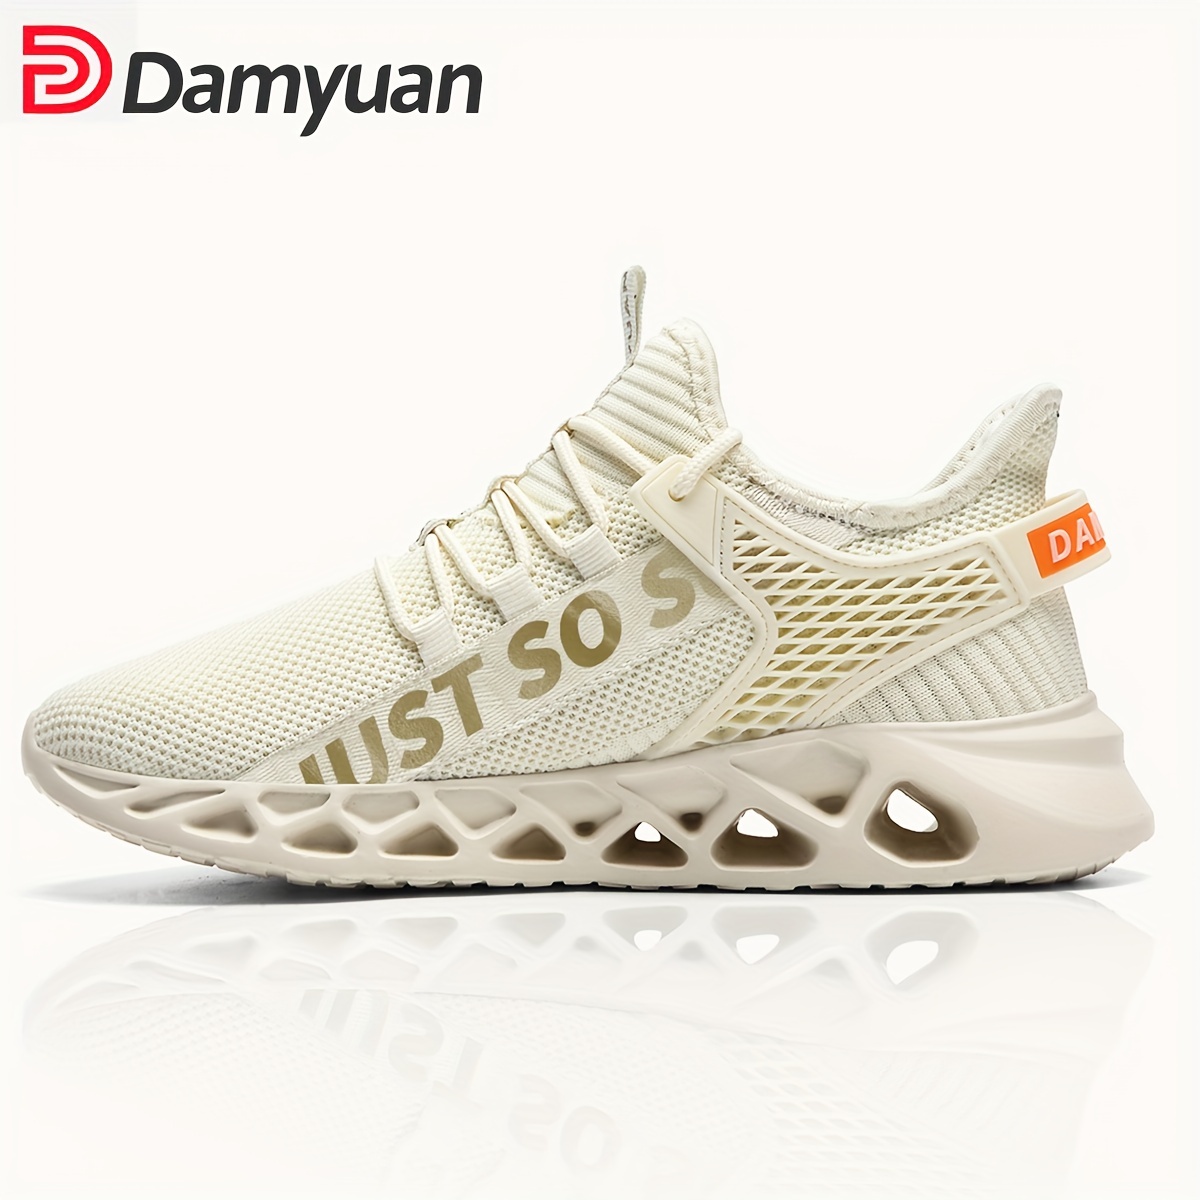 

Men's Blade Type Shoes, Breathable Shock Absorption Running Shoes Lightweight Non-slip Shoes For Jogging Tennis Gym, Casual Walking Sneakers